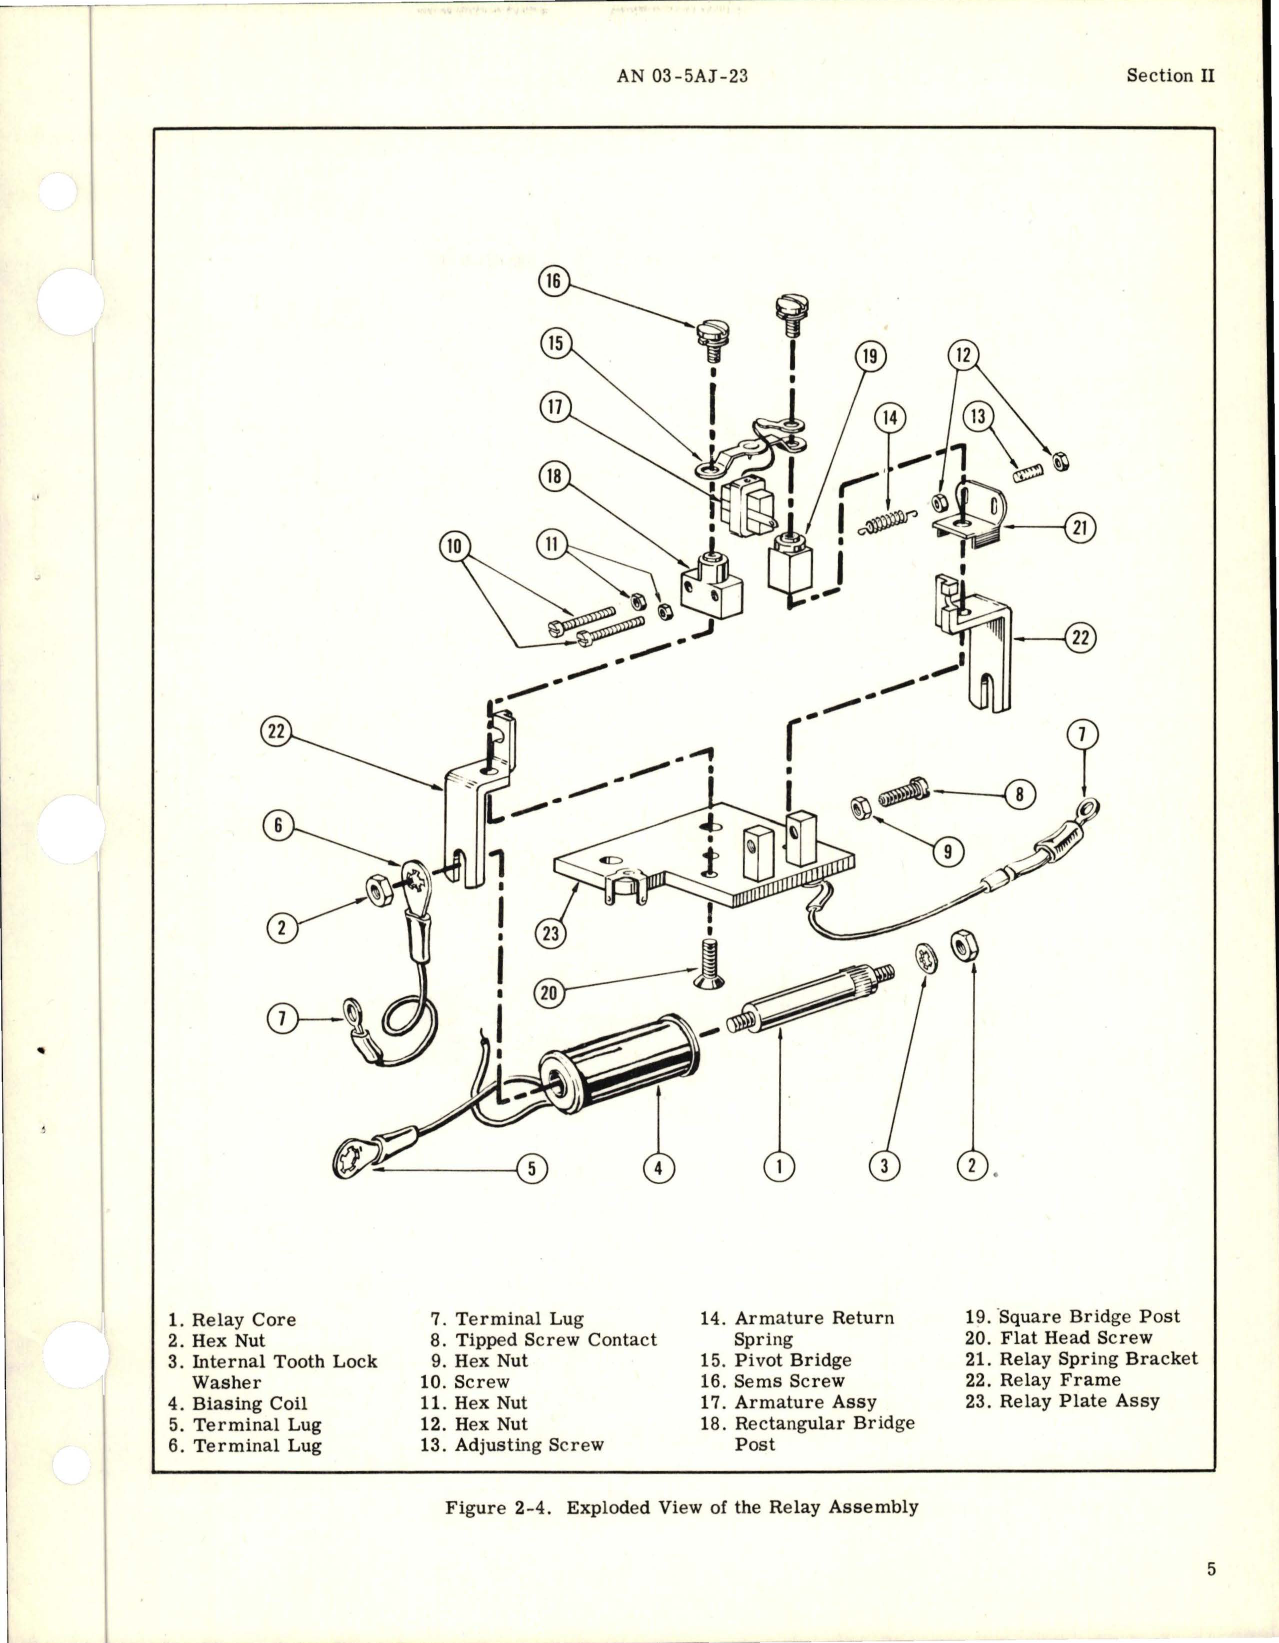 Sample page 9 from AirCorps Library document: Overhaul Instructions for Dropout Relay - Model A-711J and A-711K - Type AN3391-2B and AN3391-2A 